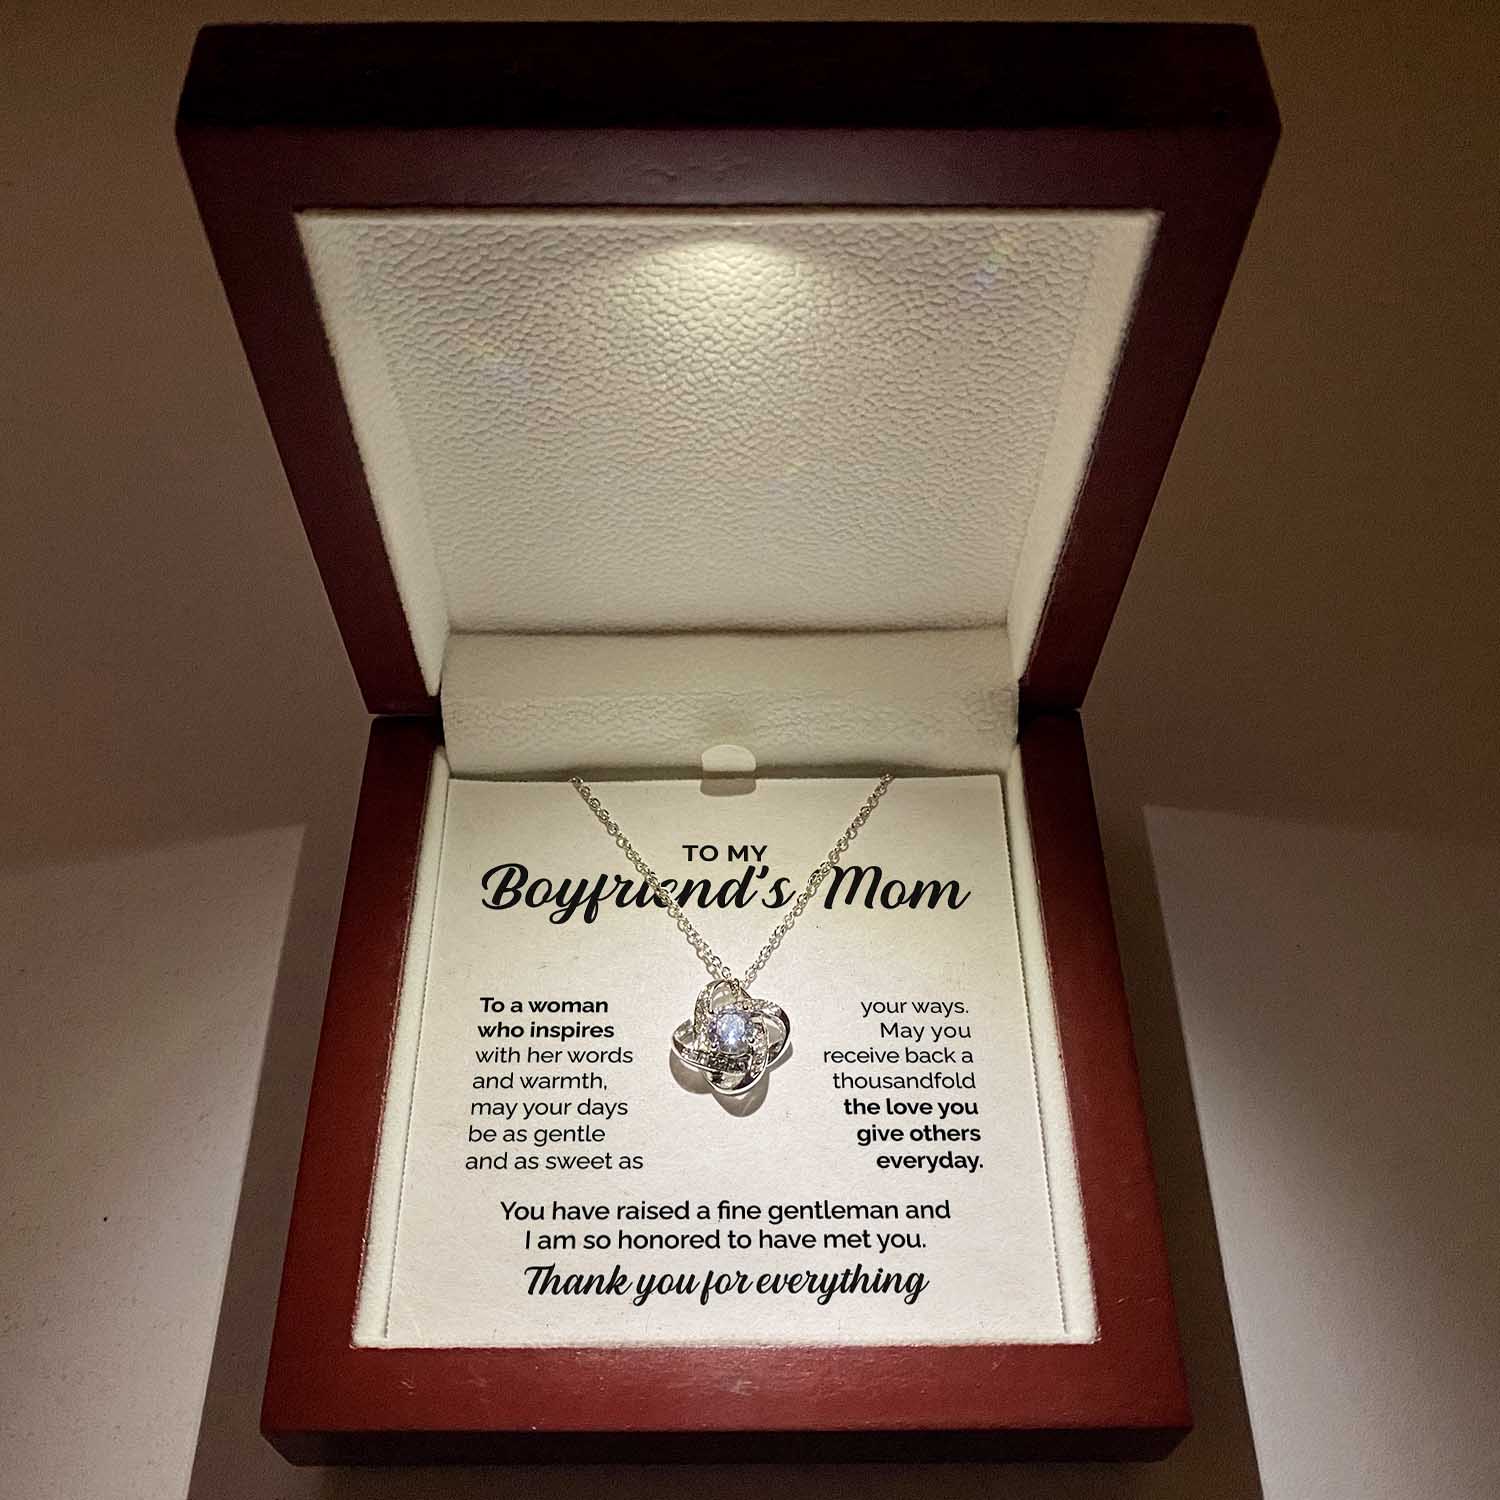 ShineOn Fulfillment Jewelry Mahogany Style Luxury Box (w/LED) To my Boyfriend's Mom - To a woman who inspires - Love Knot Necklace